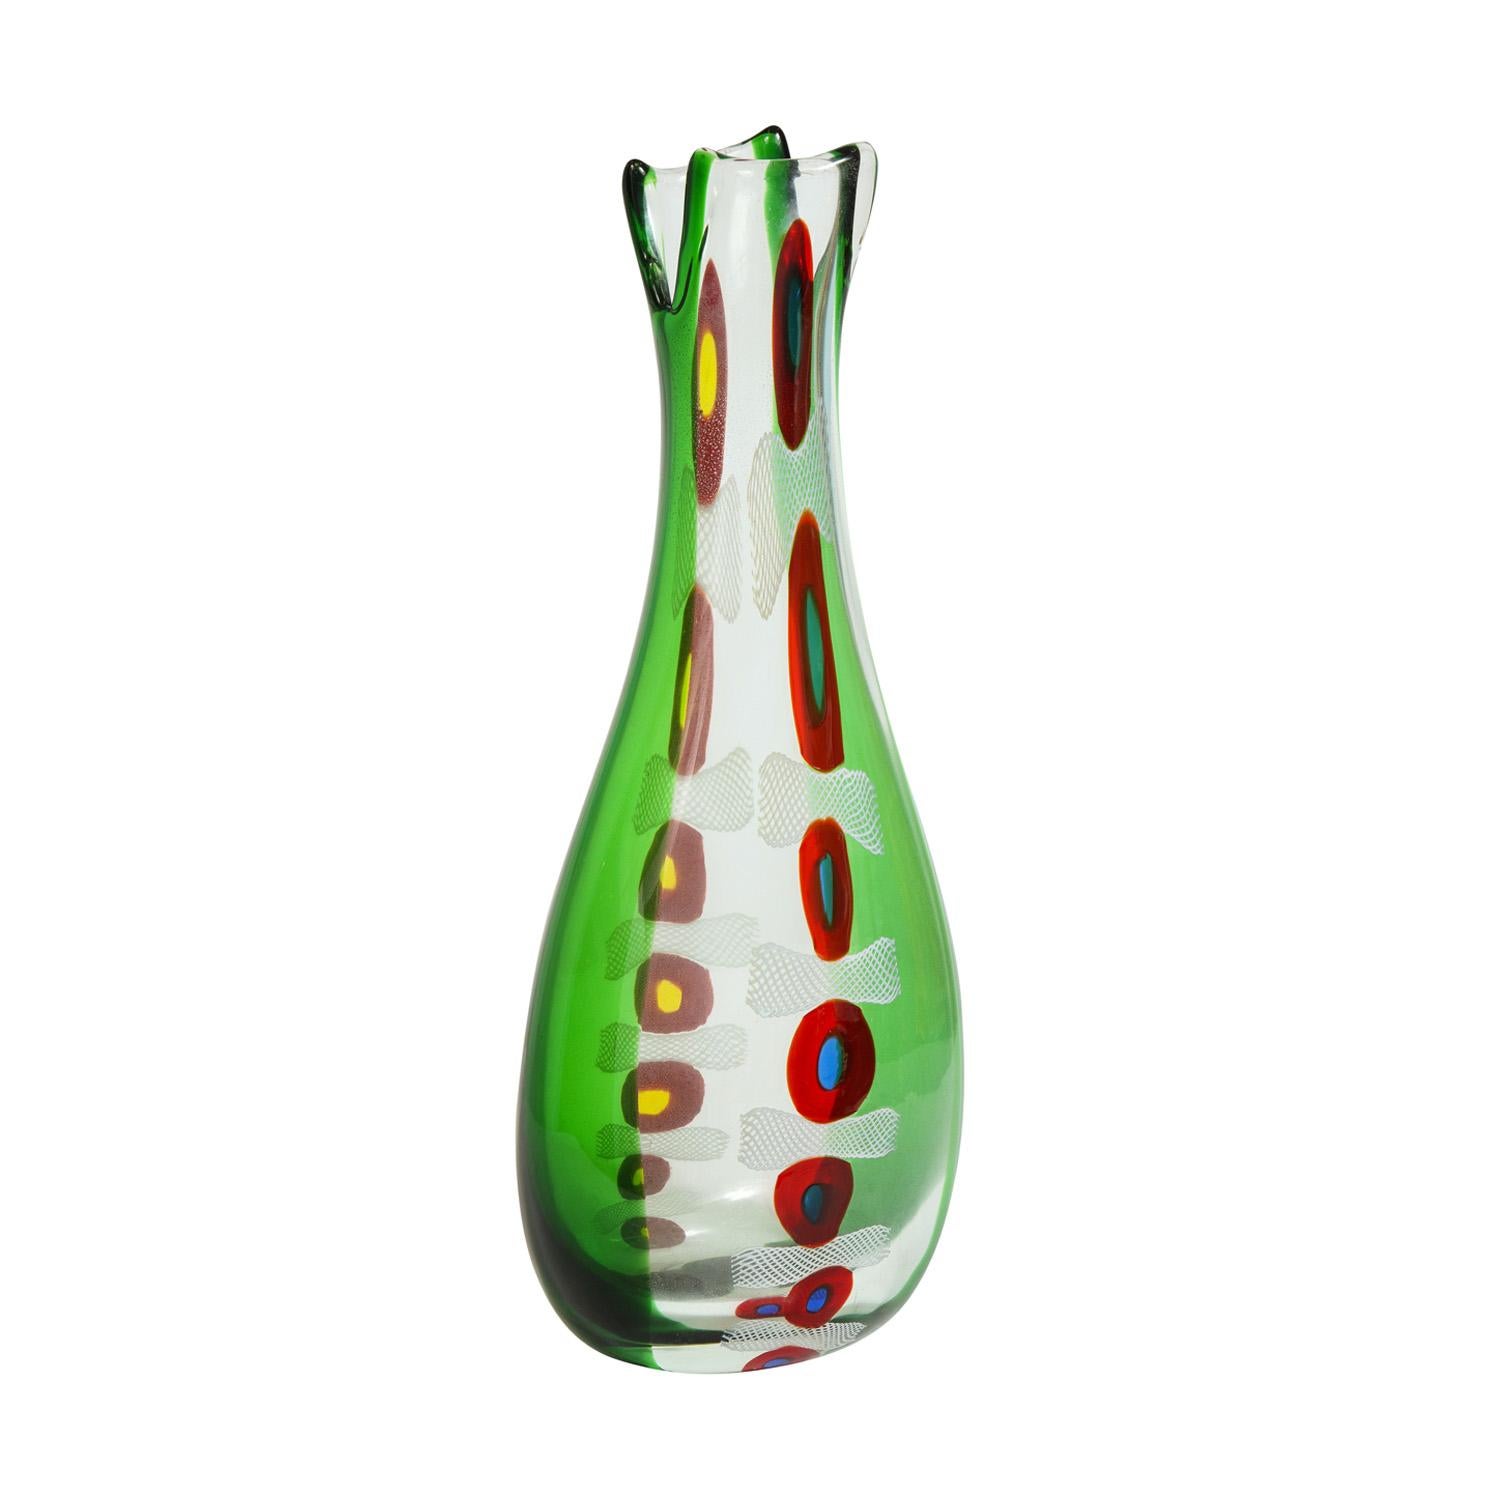 Hand-blown vase from the Murrine Incatenate series, with red and blue murrine and green up the sides, by Anzolo Fuga for AVEM, Murano Italy, ca 1959

Literature: Anzolo Fuga, Murano Glass Artist, Designs for A.V.E.M. by Rosa Barovier Mentasti,